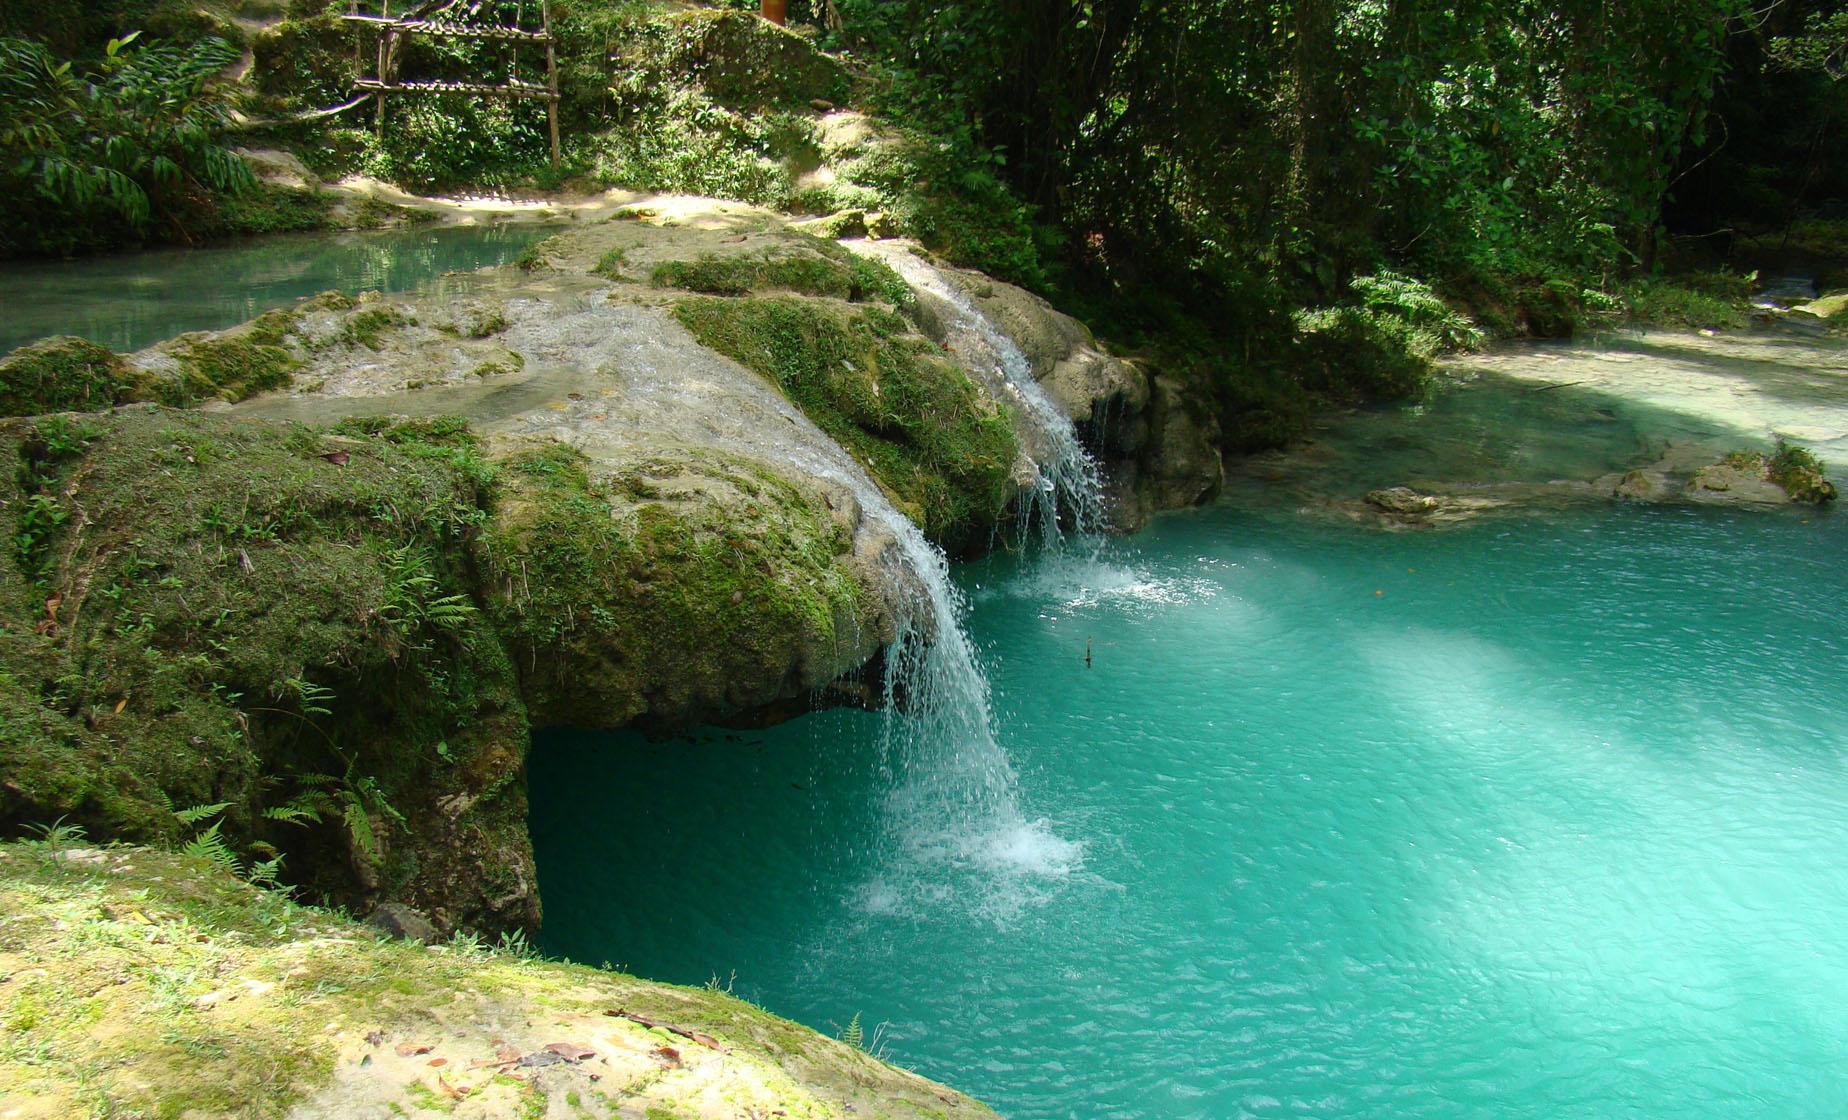 Blue Hole and Dunn's River Falls